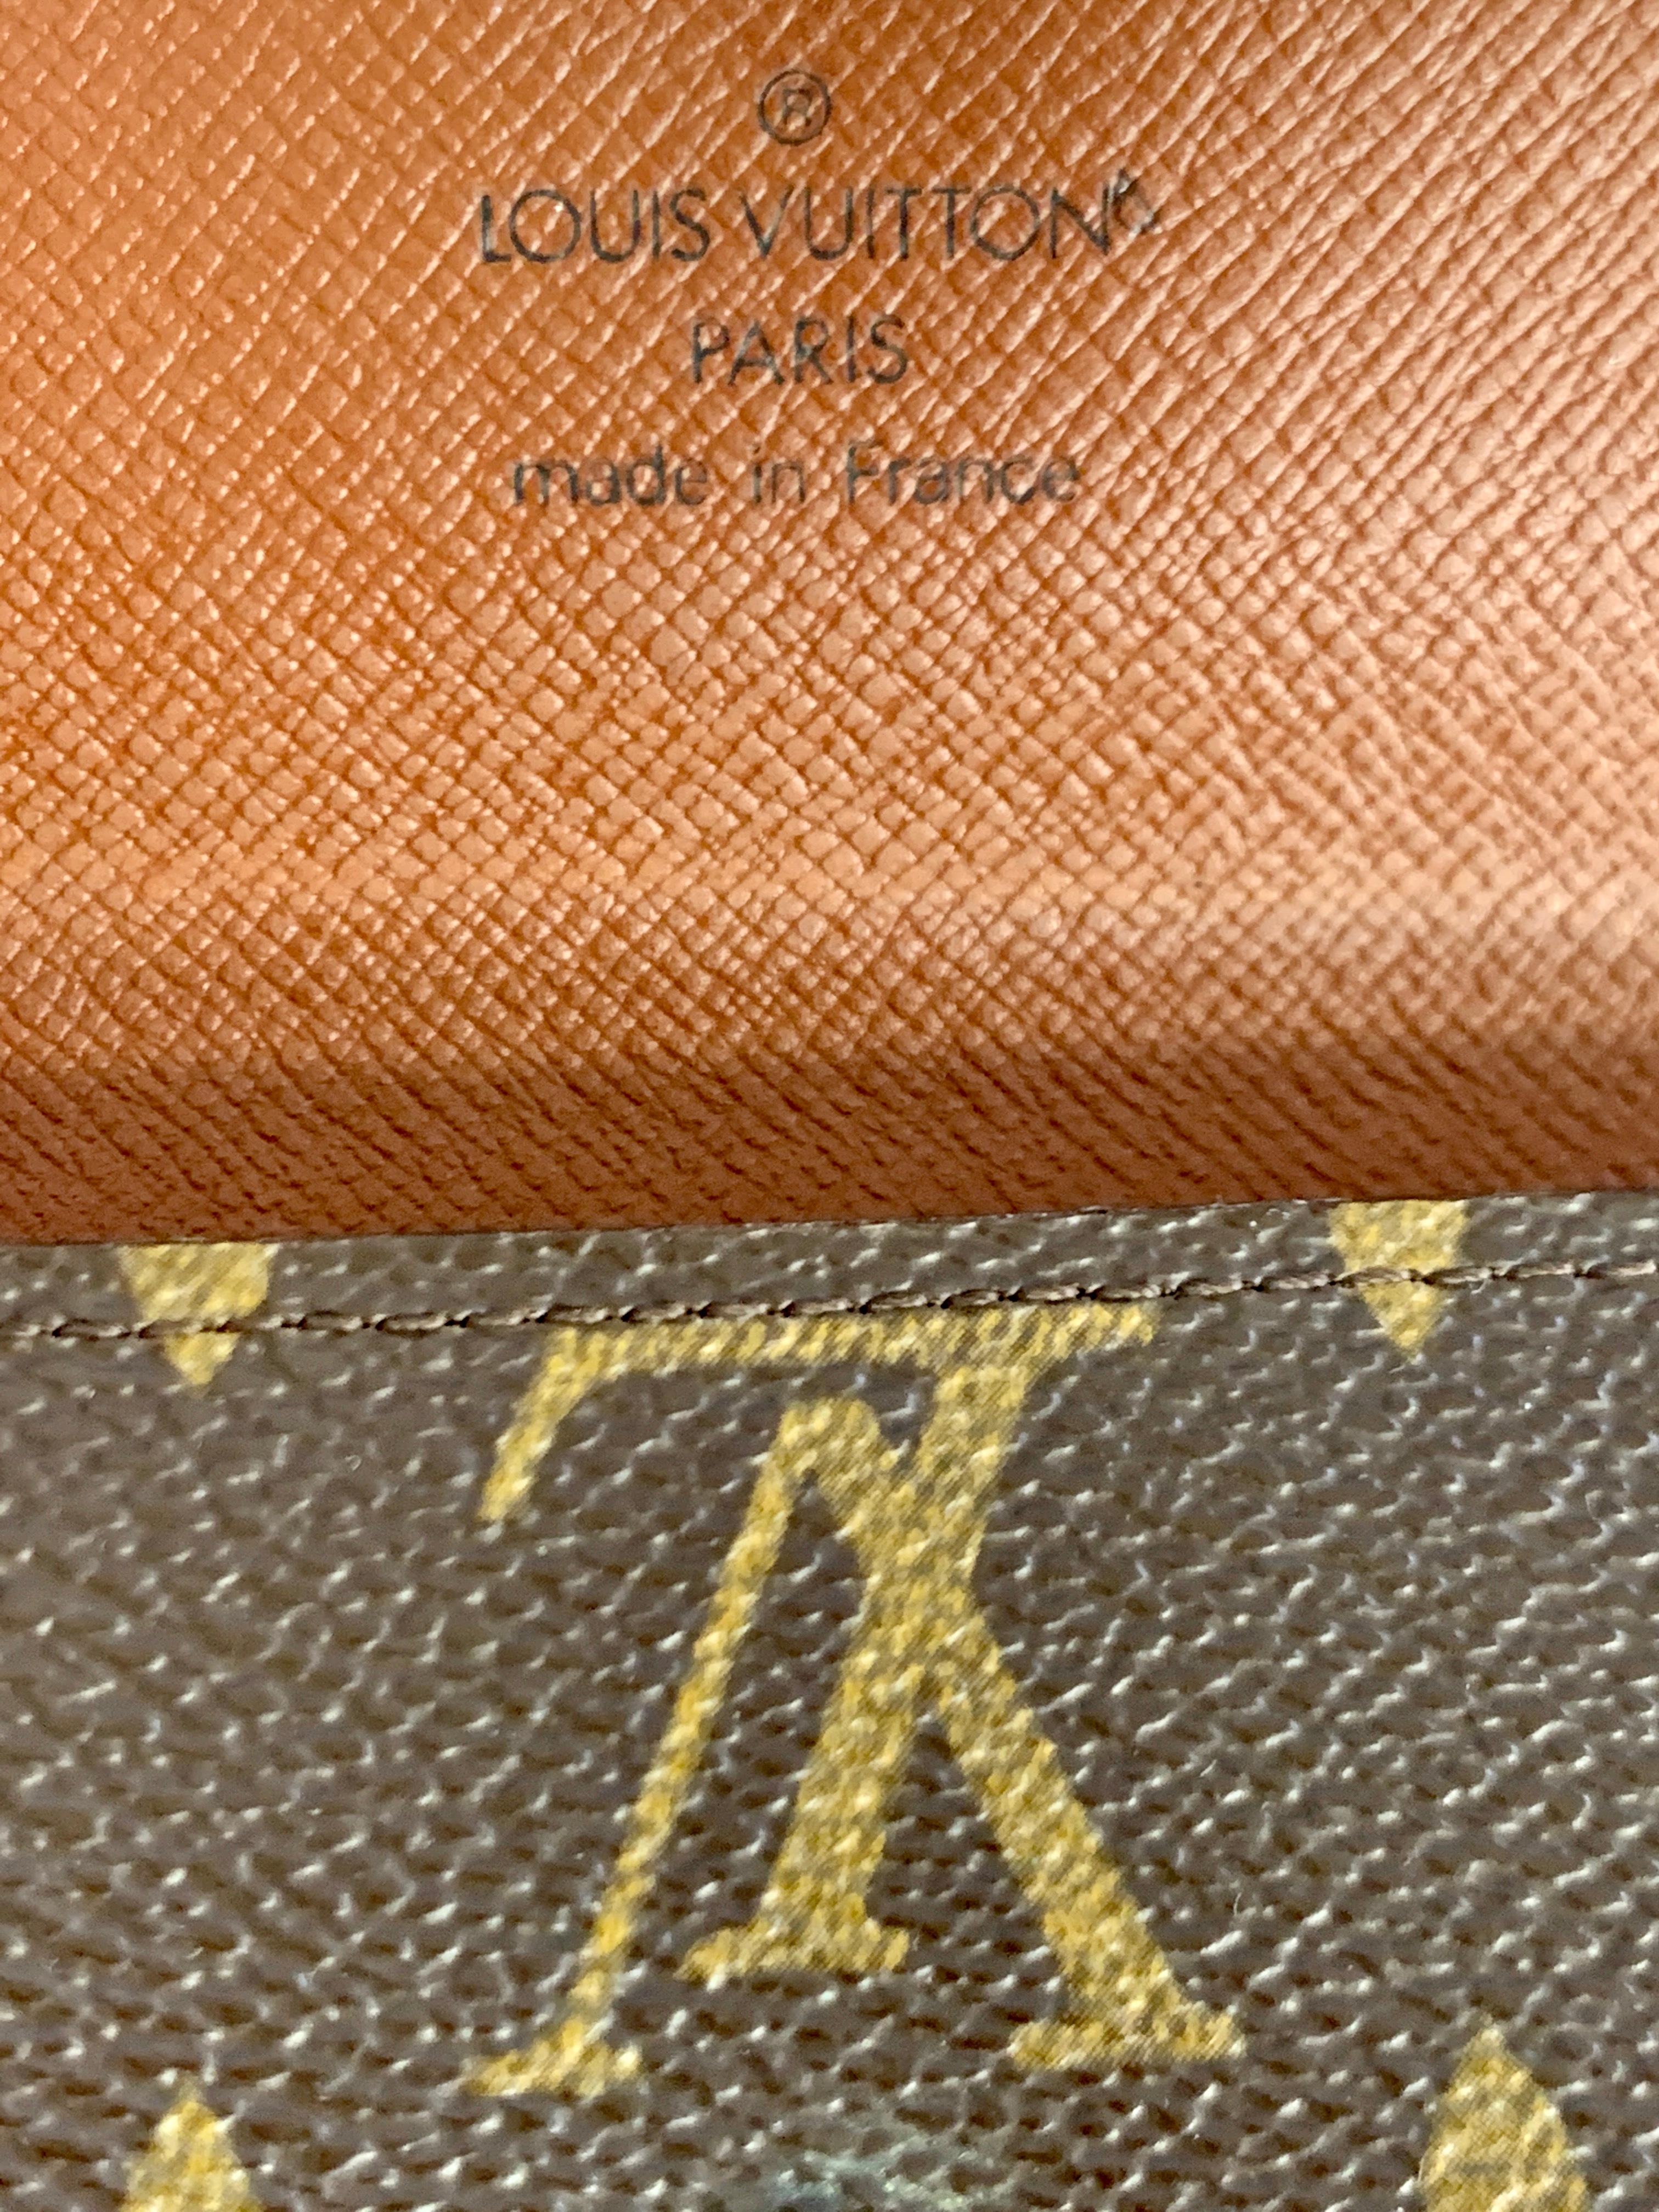 LOUIS VUITTON   Elise Portefeuille  Marco  Browns Monogram, Trifold  Wallet
Brand	LOUIS VUITTON
model　name	 Elise Portefeuille 

Serial Number	SPB958
Material	Monogram Leather
Color	Brown

Excellent condition
No signs of wear, no Rubbed edges , no